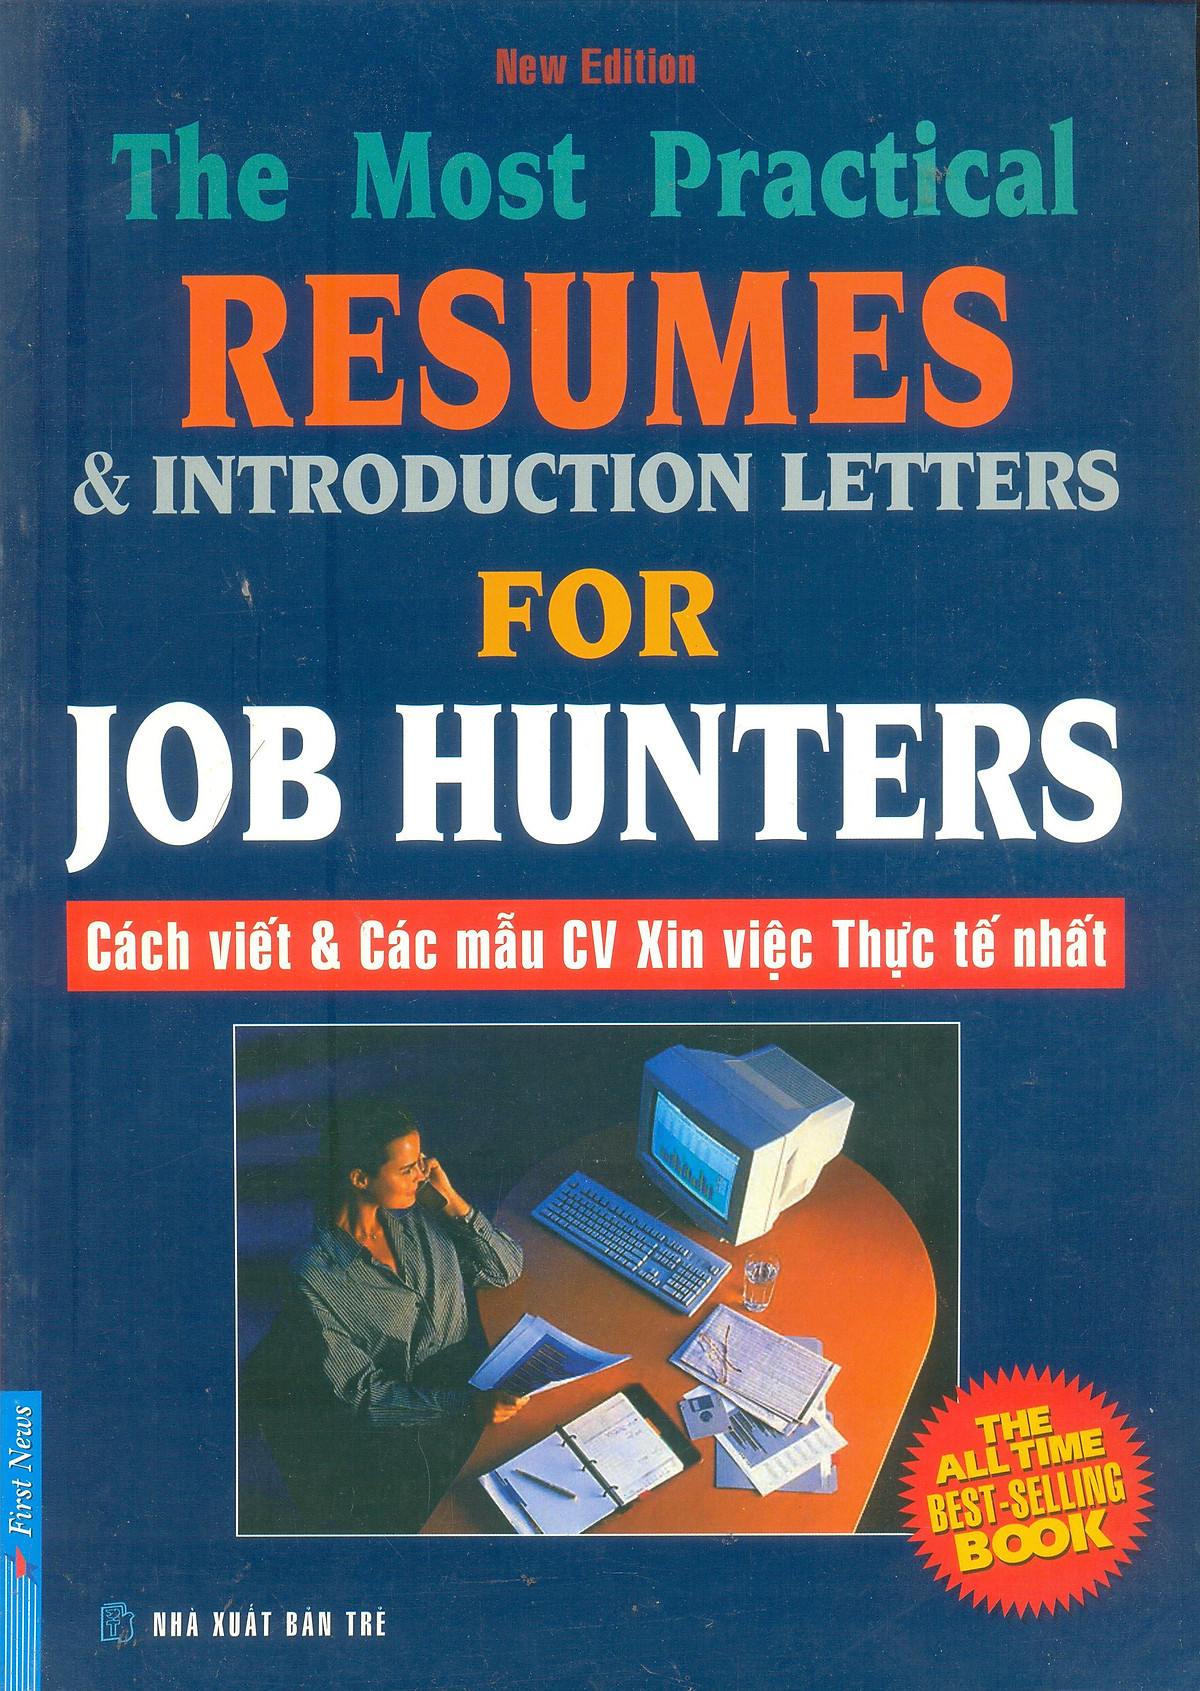 The Most Practical Resumes